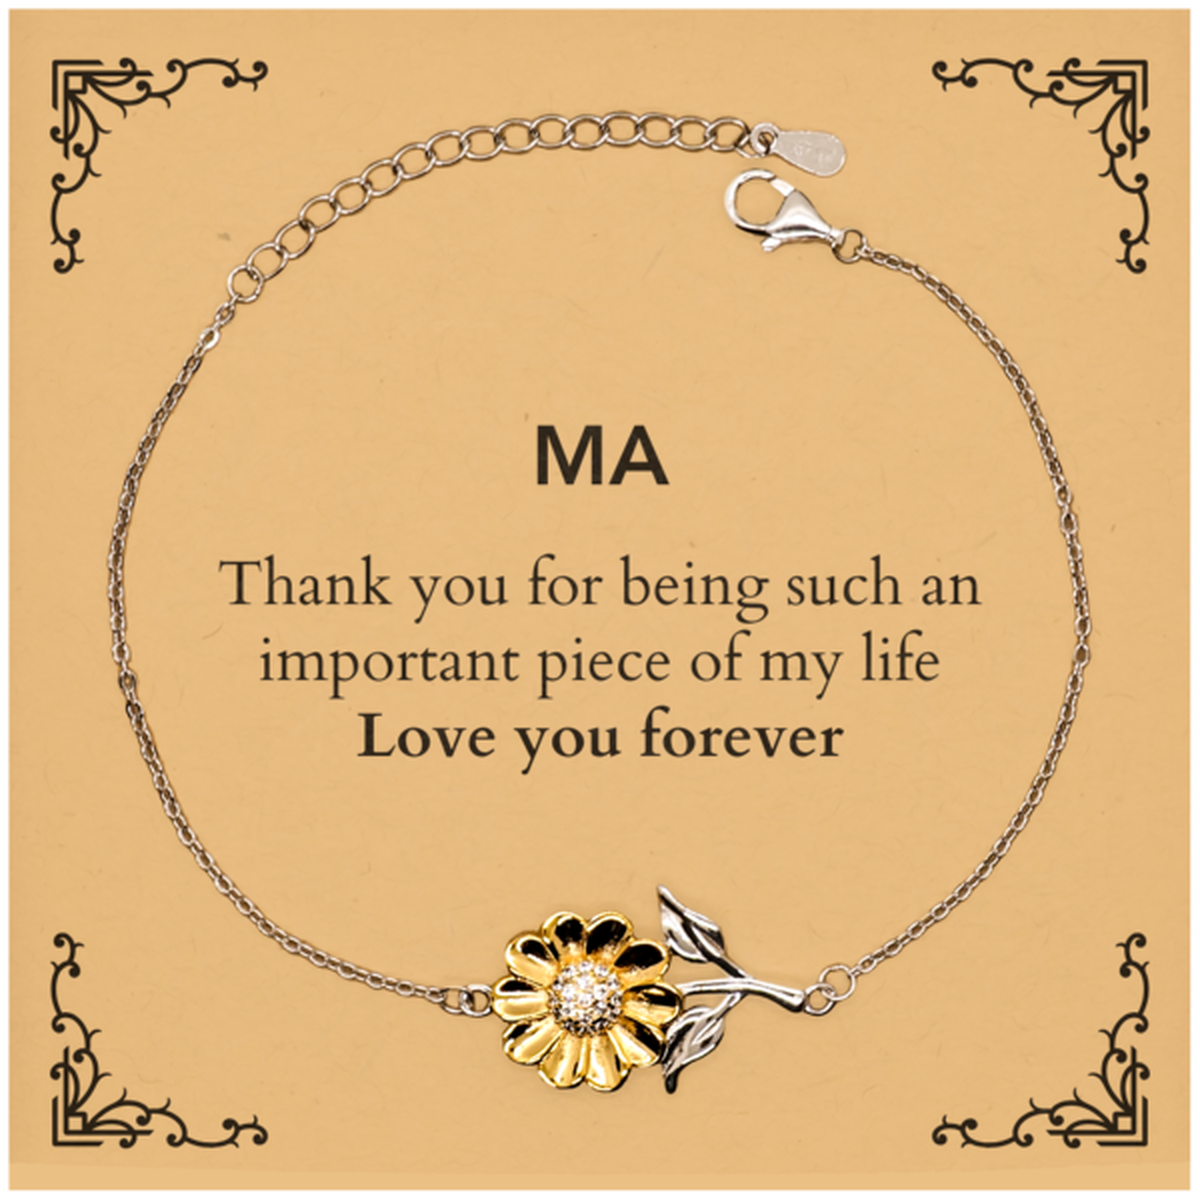 Appropriate Ma Sunflower Bracelet Epic Birthday Gifts for Ma Thank you for being such an important piece of my life Ma Christmas Mothers Fathers Day